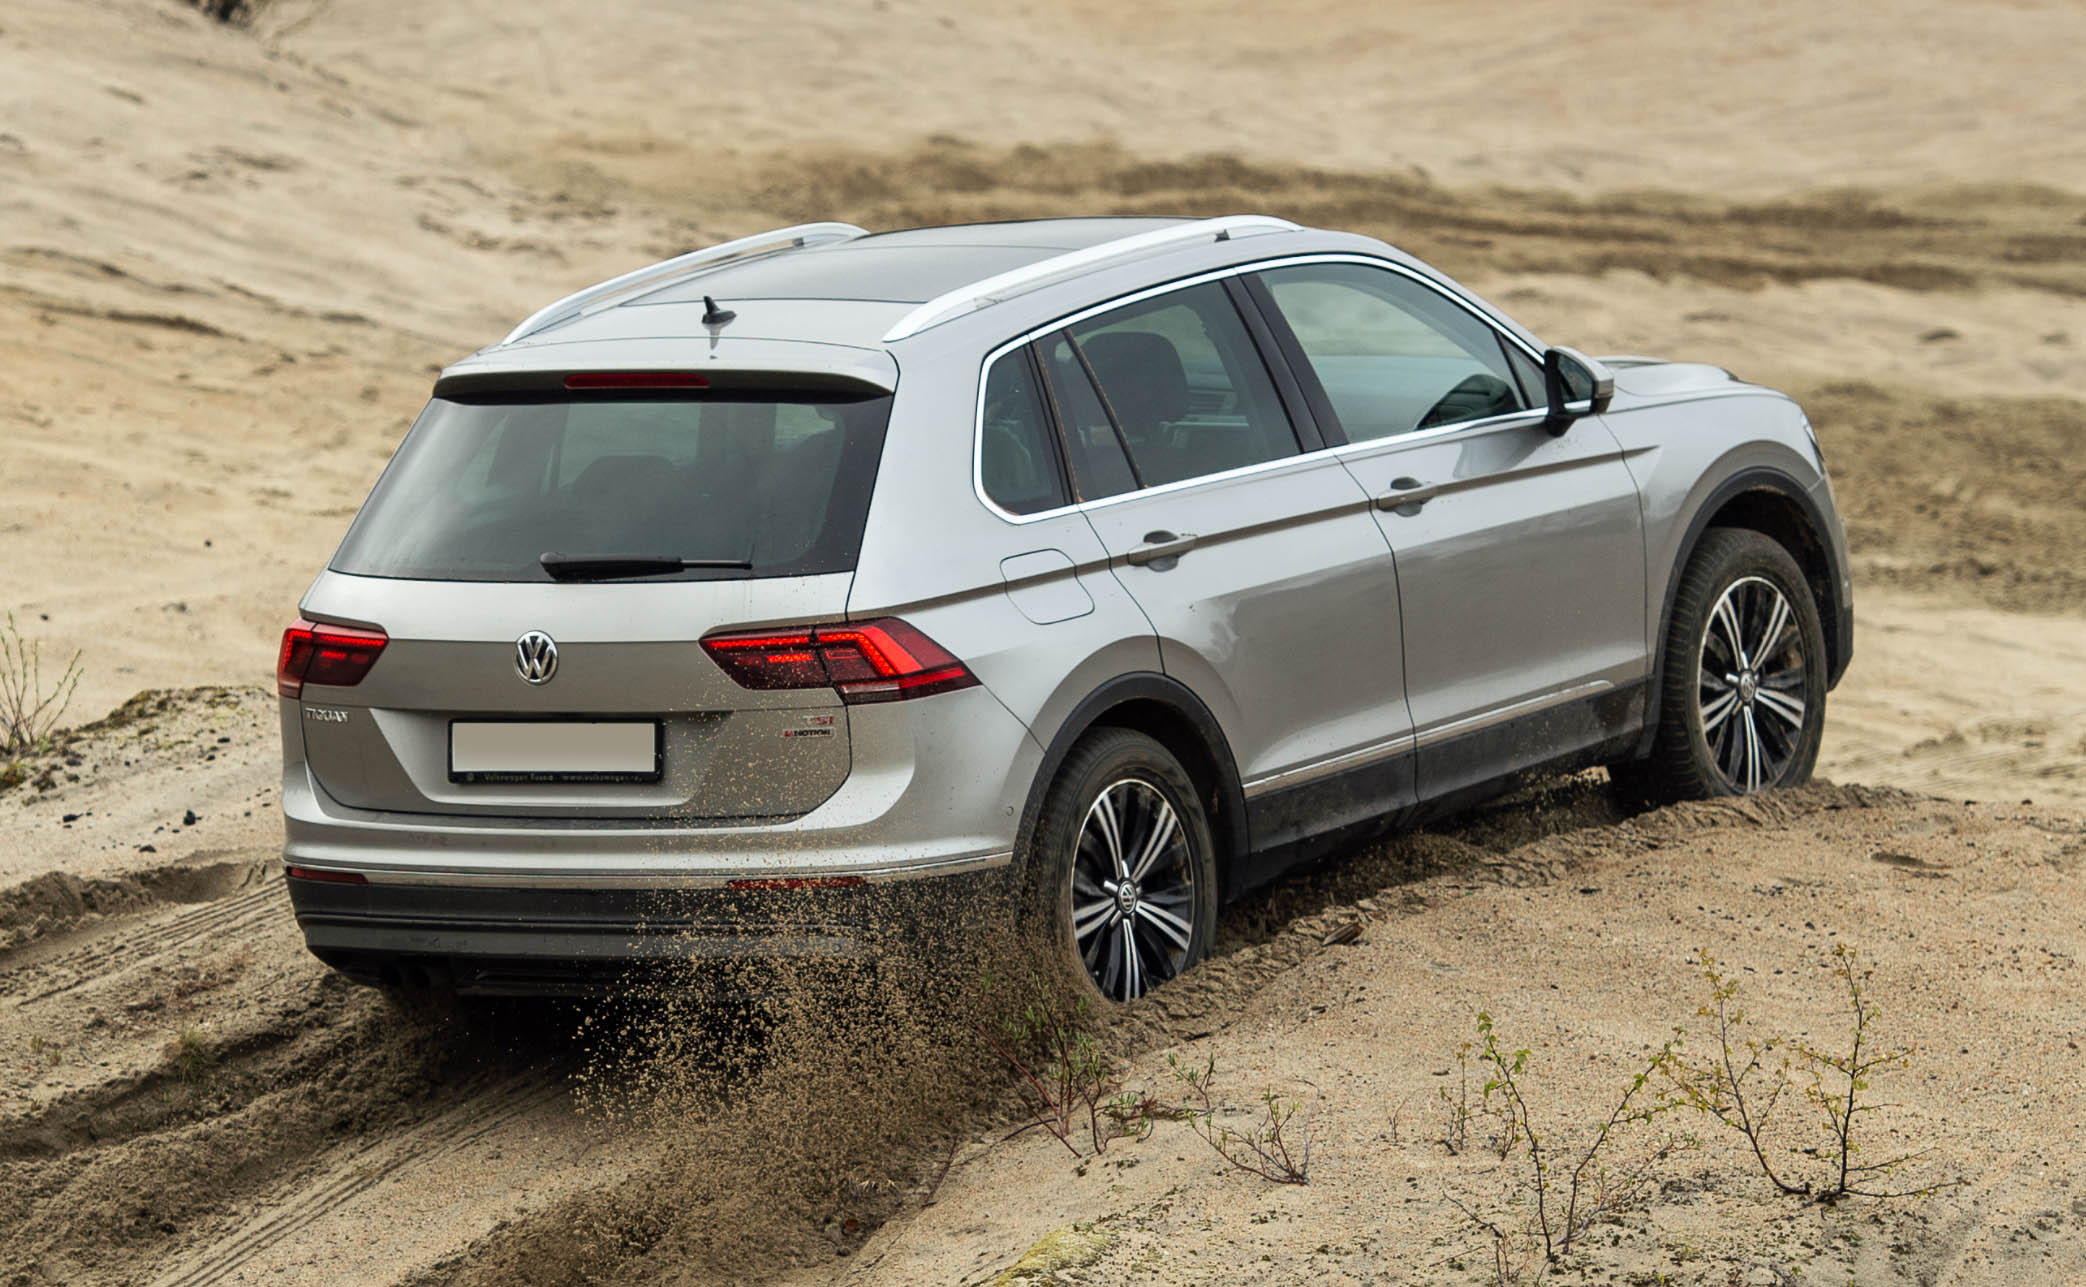 aria-label="vw tiguan in sand 4motion"